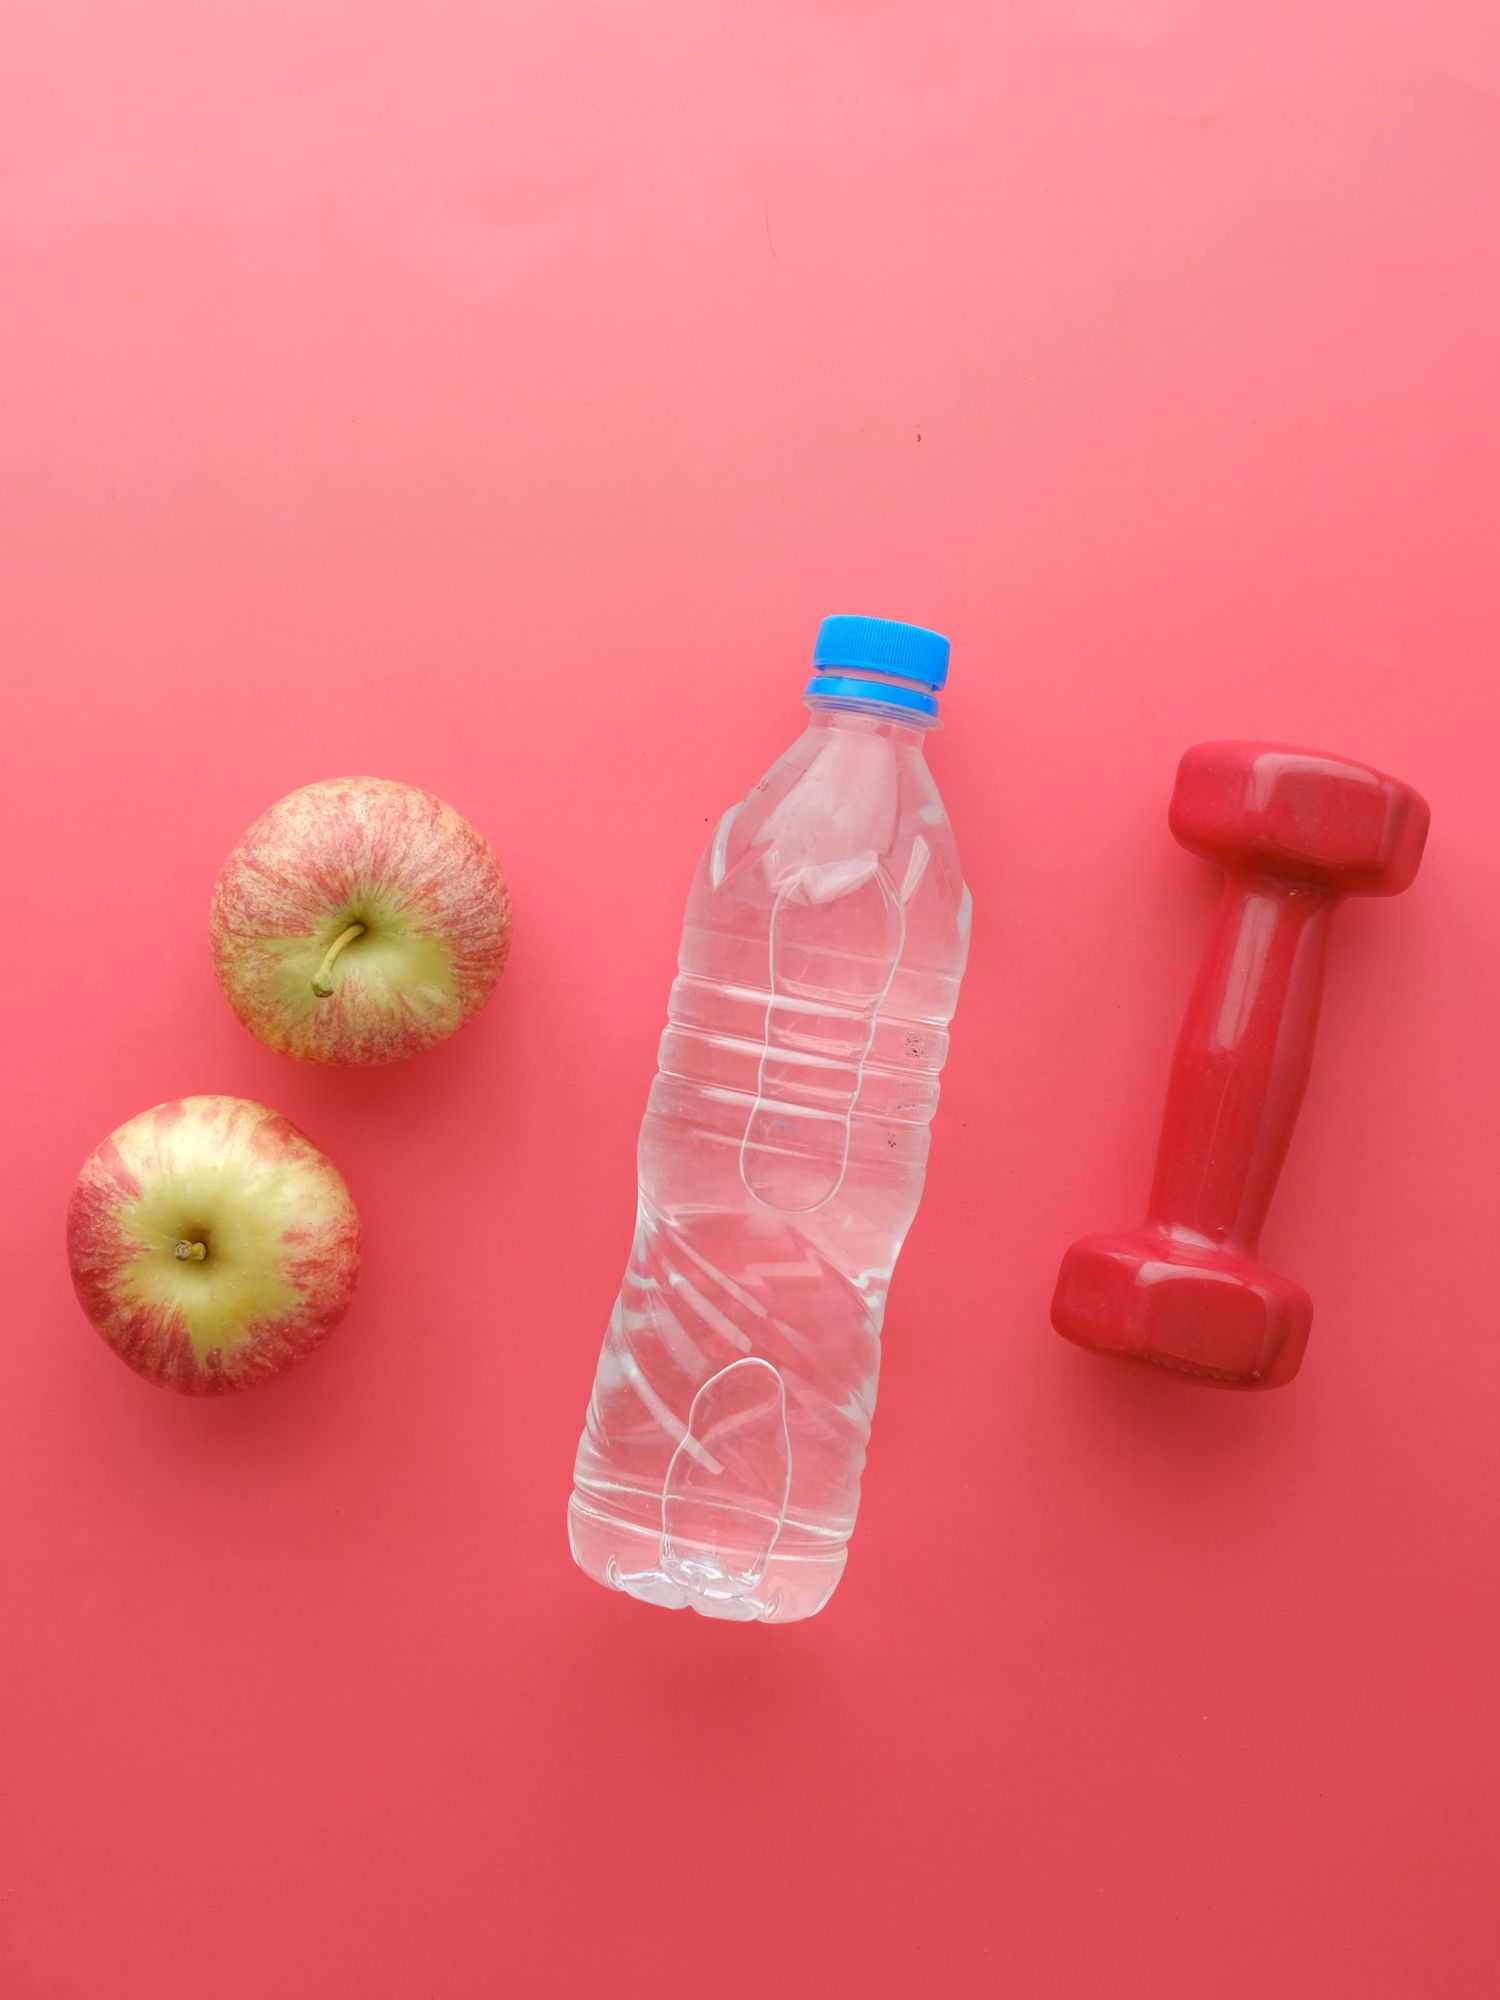 What is the top-rated bottled water?